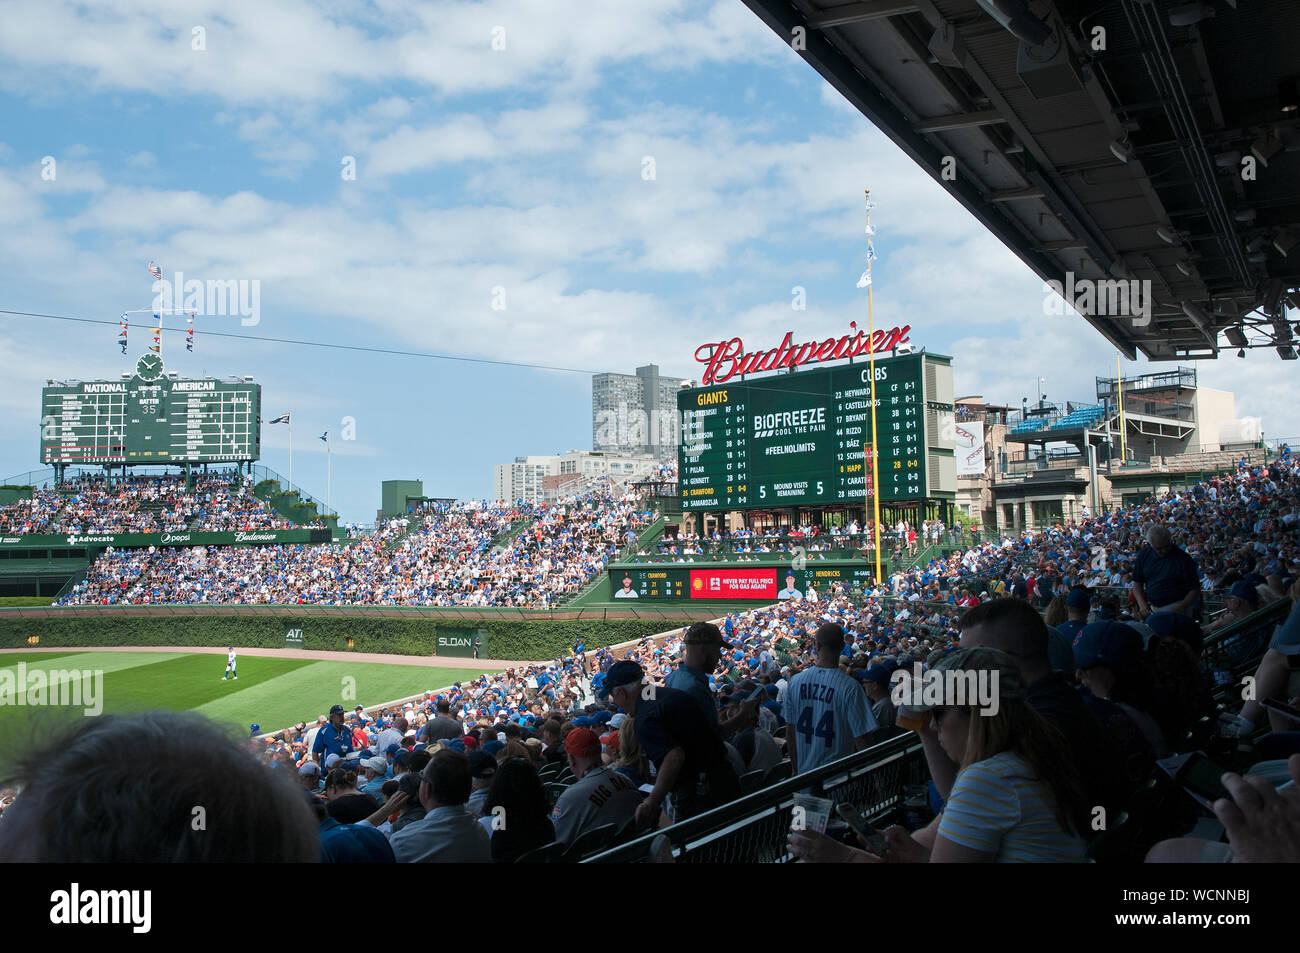 Chicago Major league baseball team the Chicago Cubs and Wrigley Field. Cubs were playing the San Francisco Giants and won the game 1-0/ Stock Photo